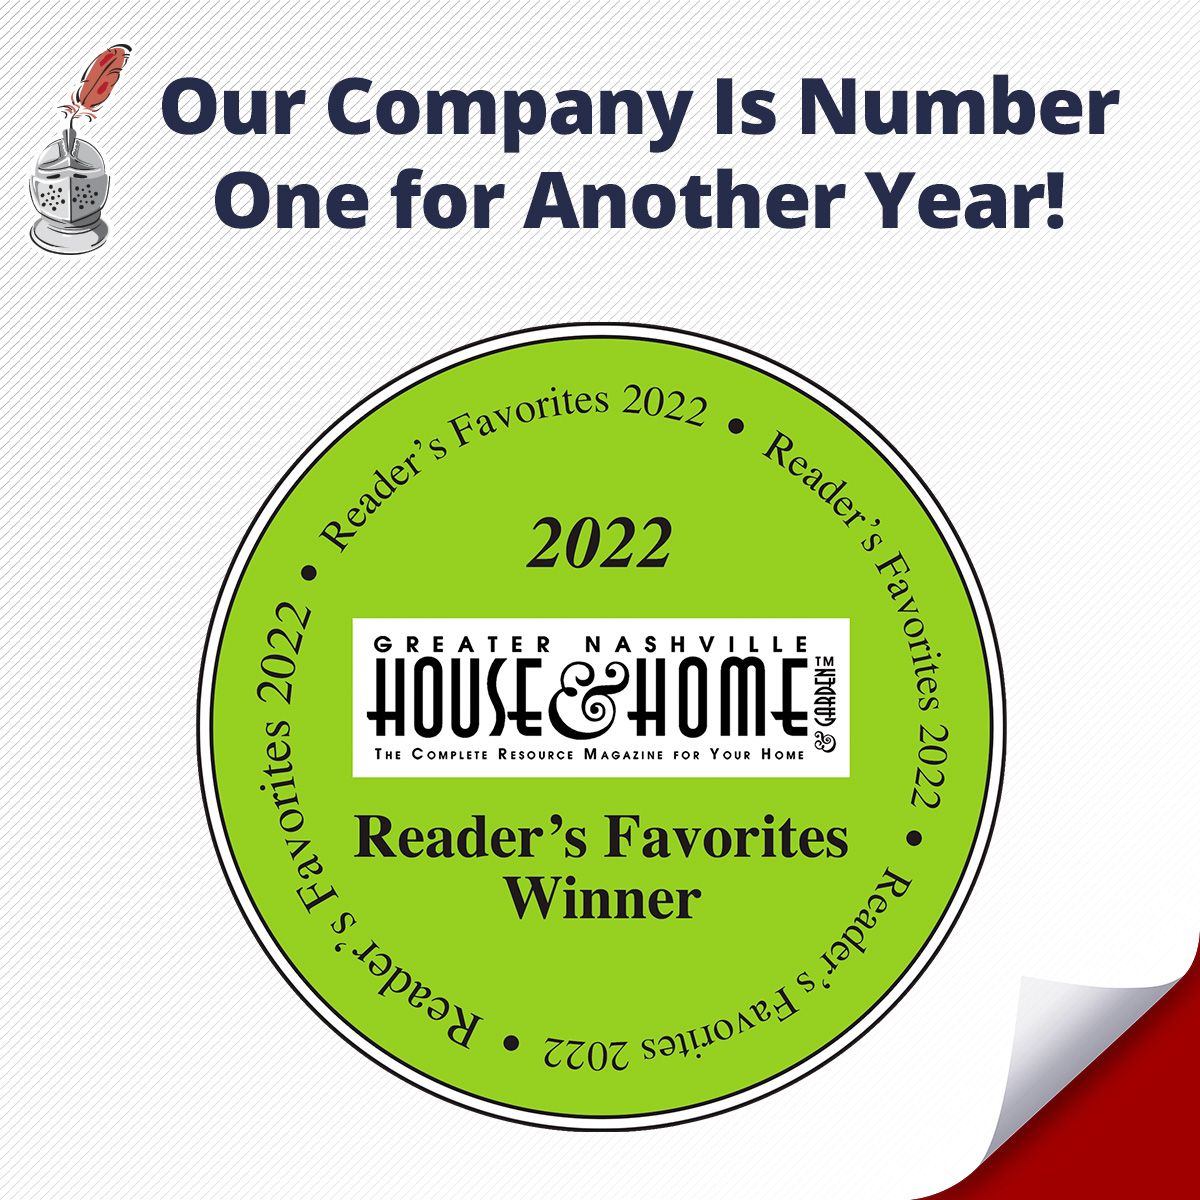 Our Company Is Number One for Another Year!